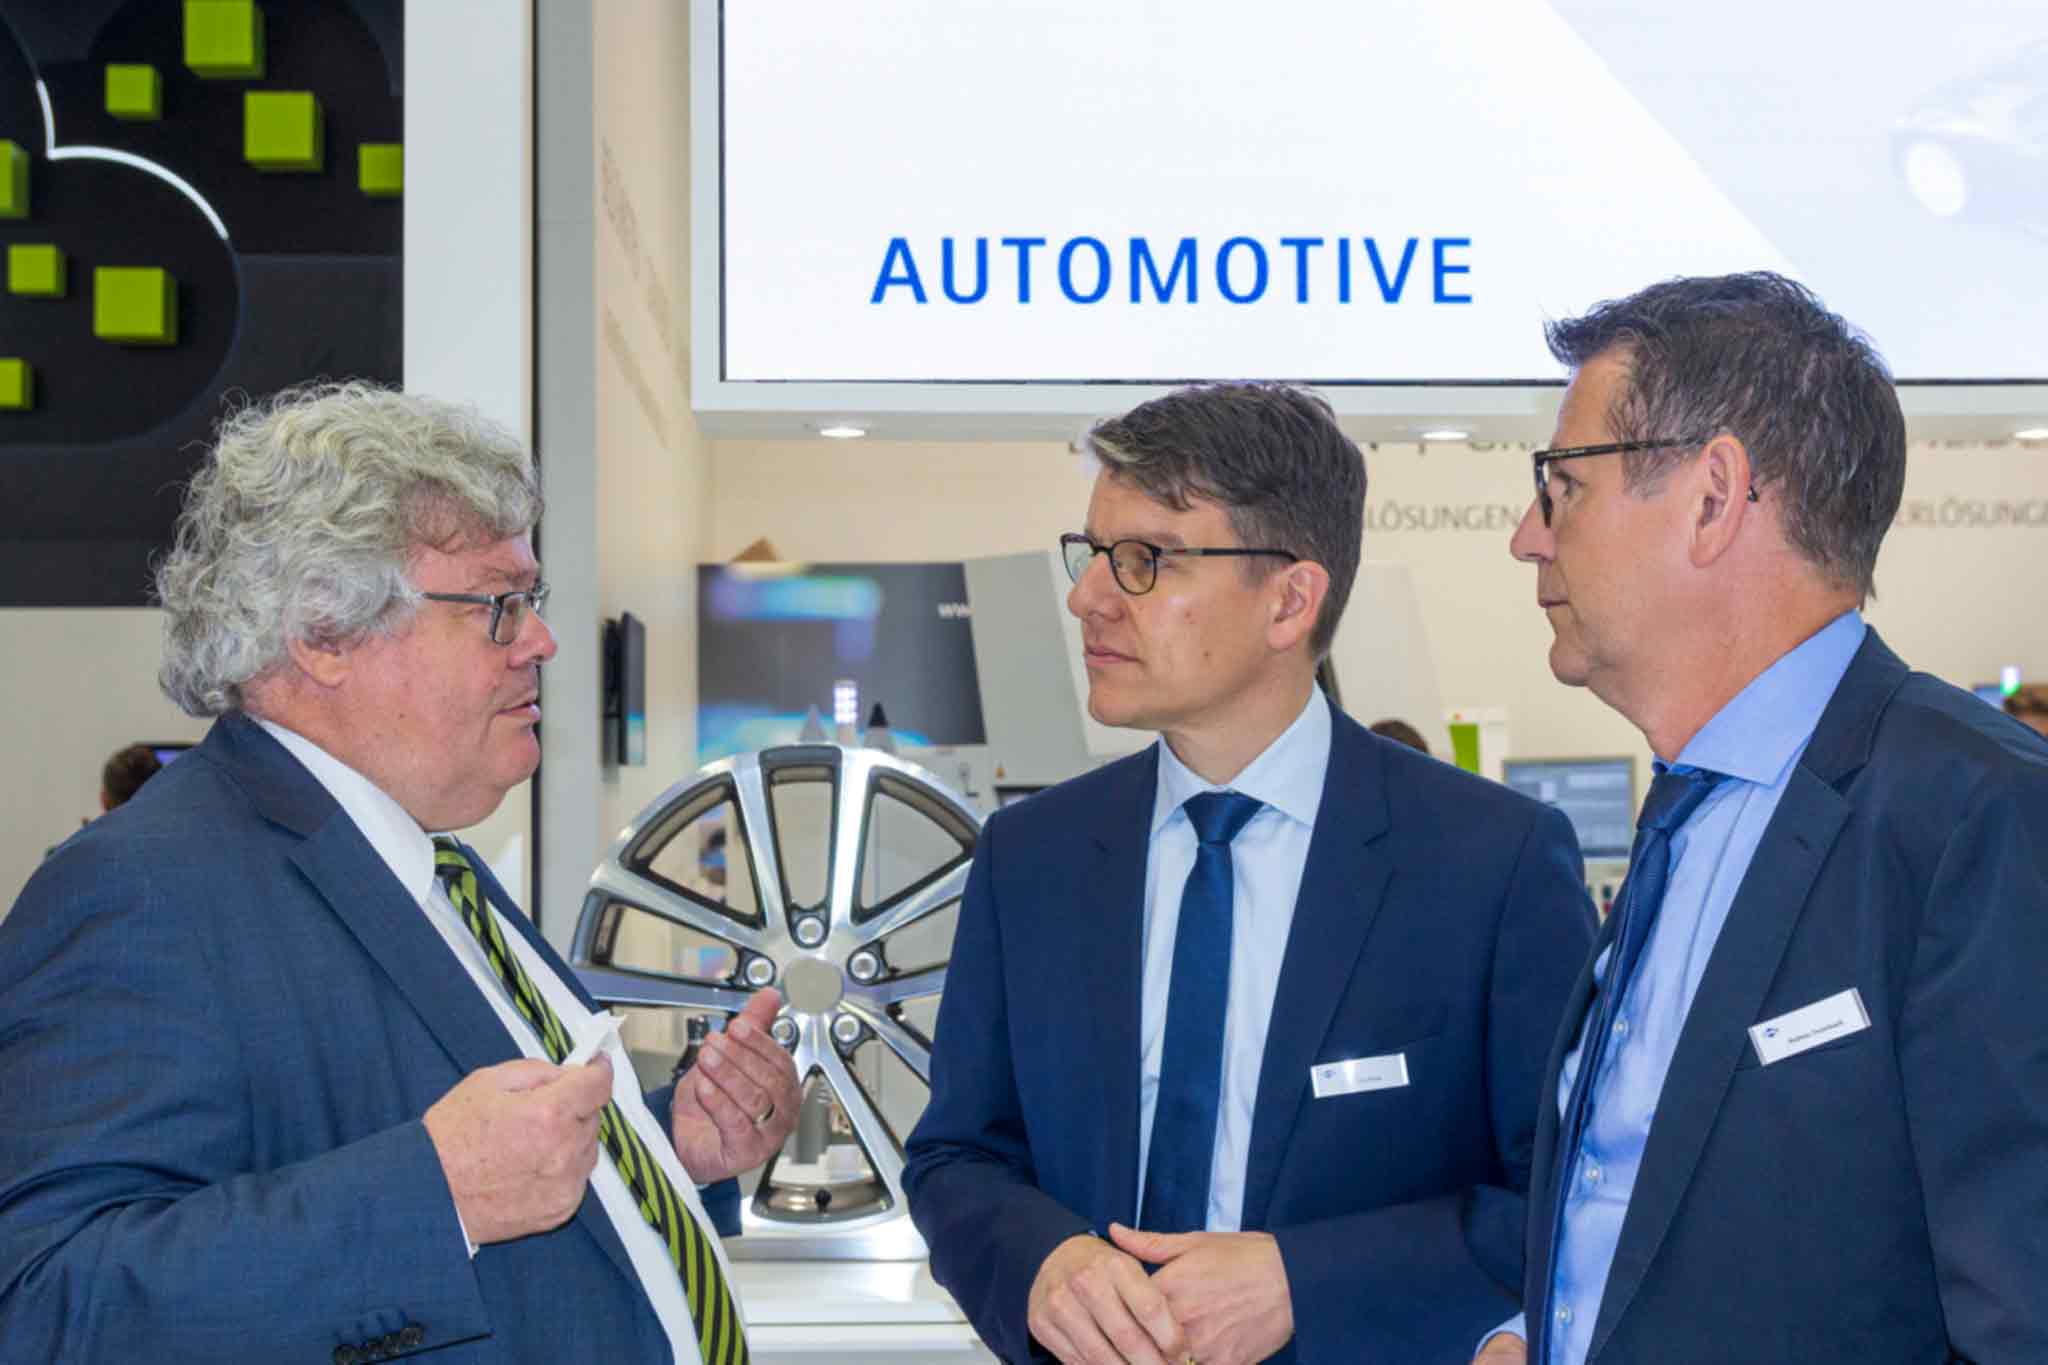 Reinhard Bütikofer having a conversation with Dr Jochen Kress and Andreas Enzenbach in front of the exhibition stand automotive presenter.